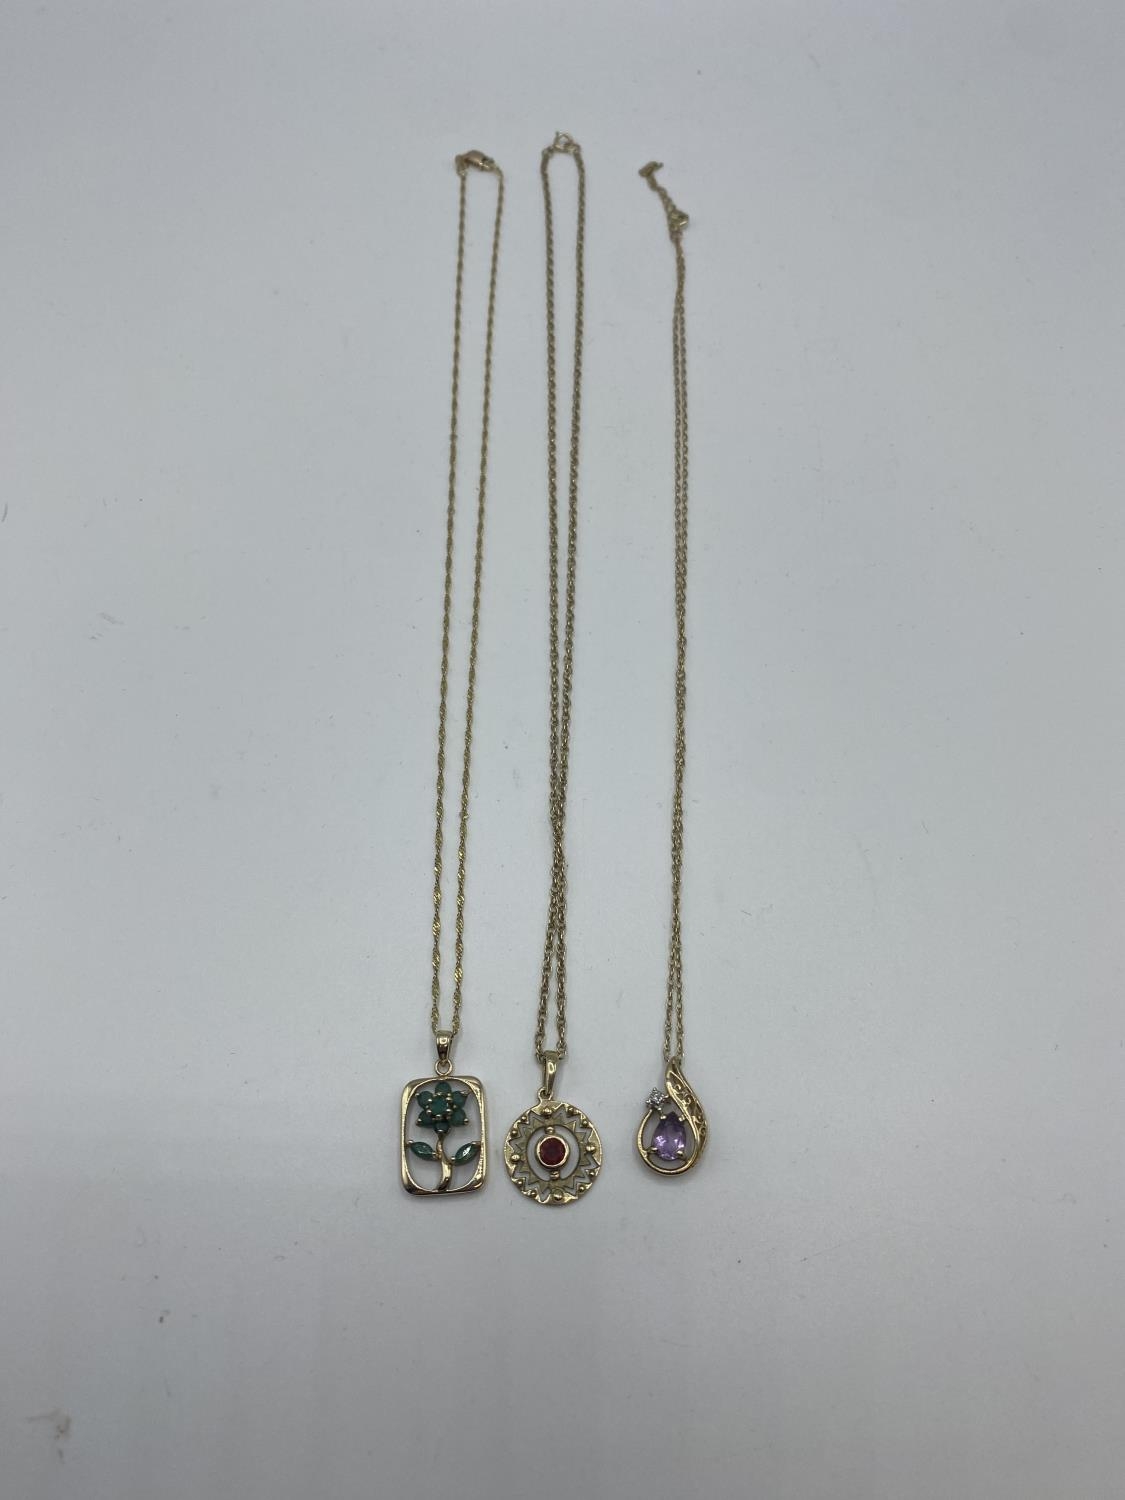 Three 9 ct gold chain link necklaces with gem set pendant 7.60 g - Image 2 of 3